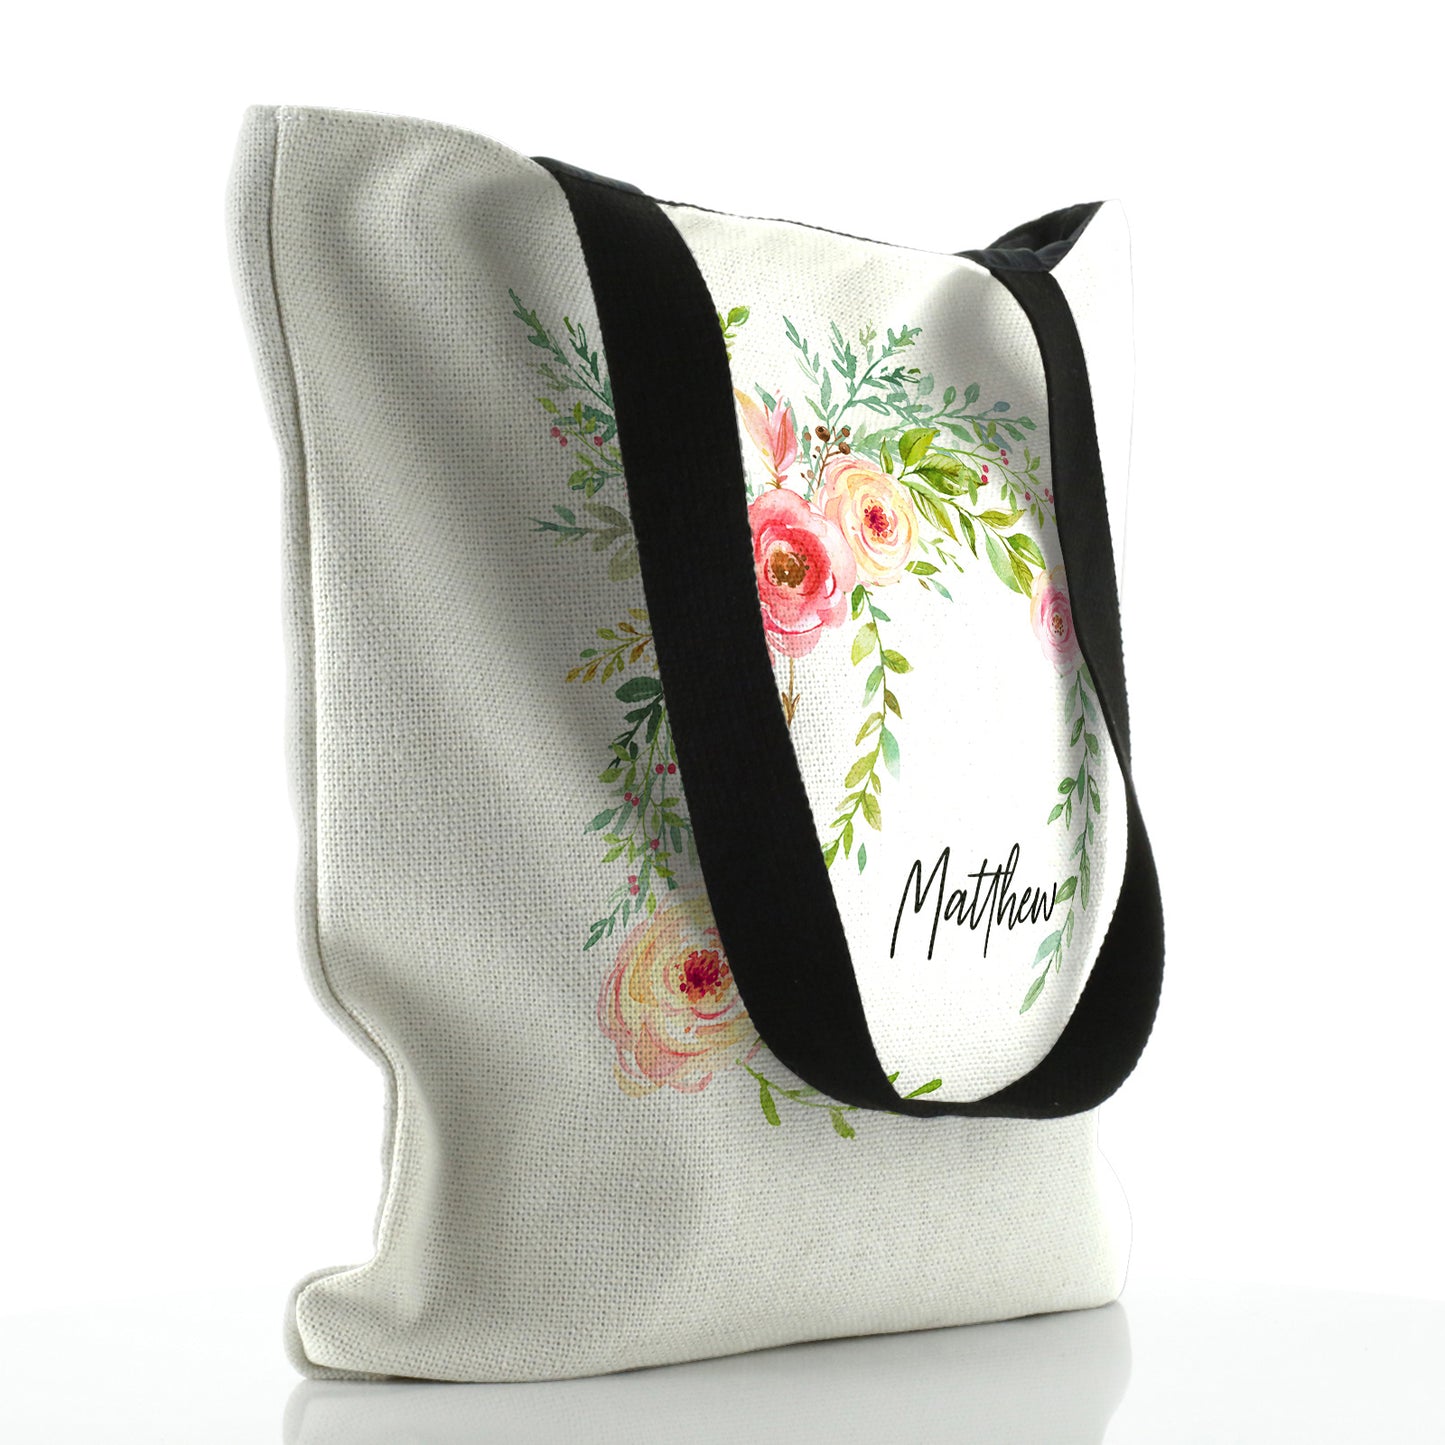 Personalised White Tote Bag with Stylish Text and Pink Flower Wreath Print